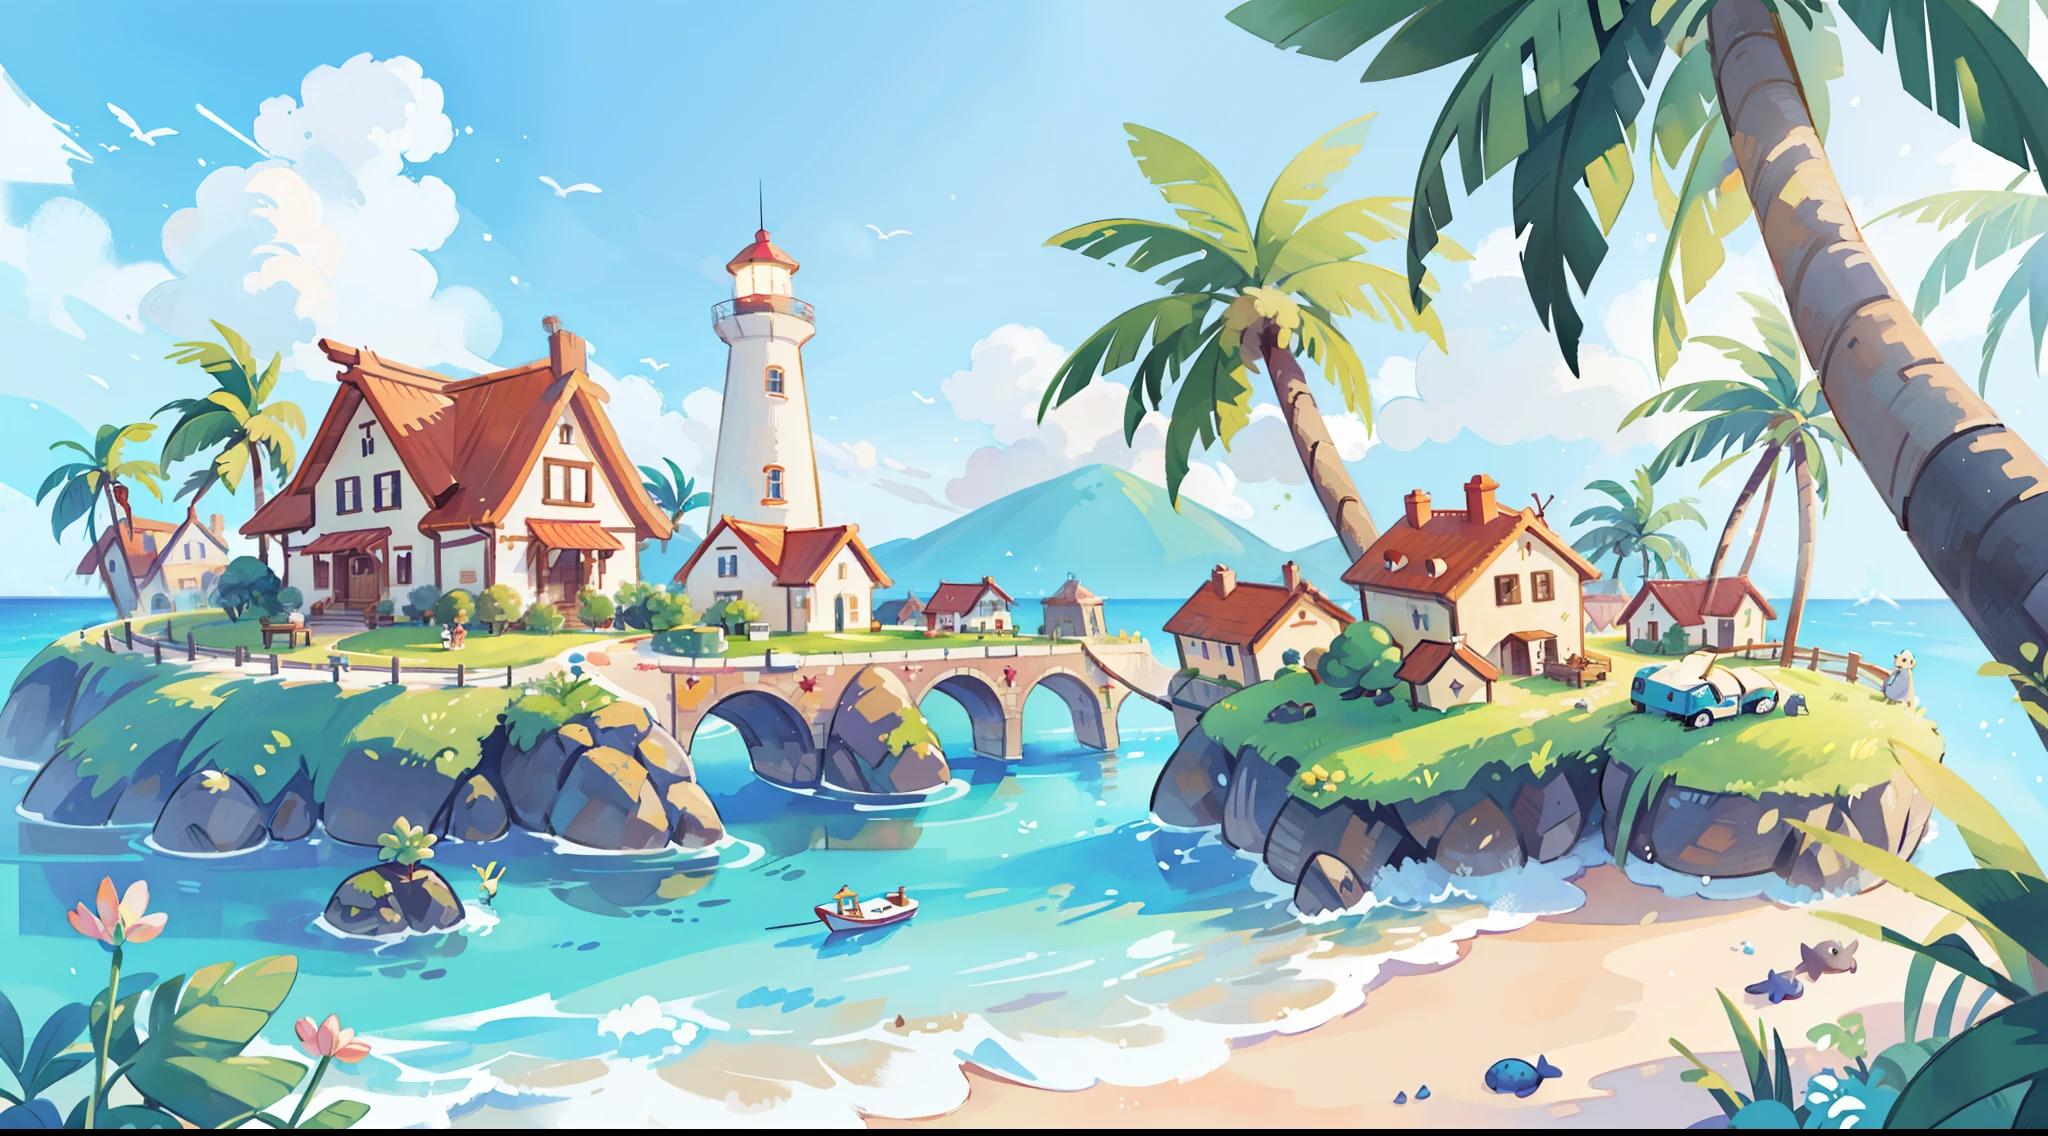 ((picture book illustration)), ocean fantasy, watercolor illustration, whimsical, warm colors, village, palm trees, houses, huge lighthouse, ((masterpiece)), highly detailed environment